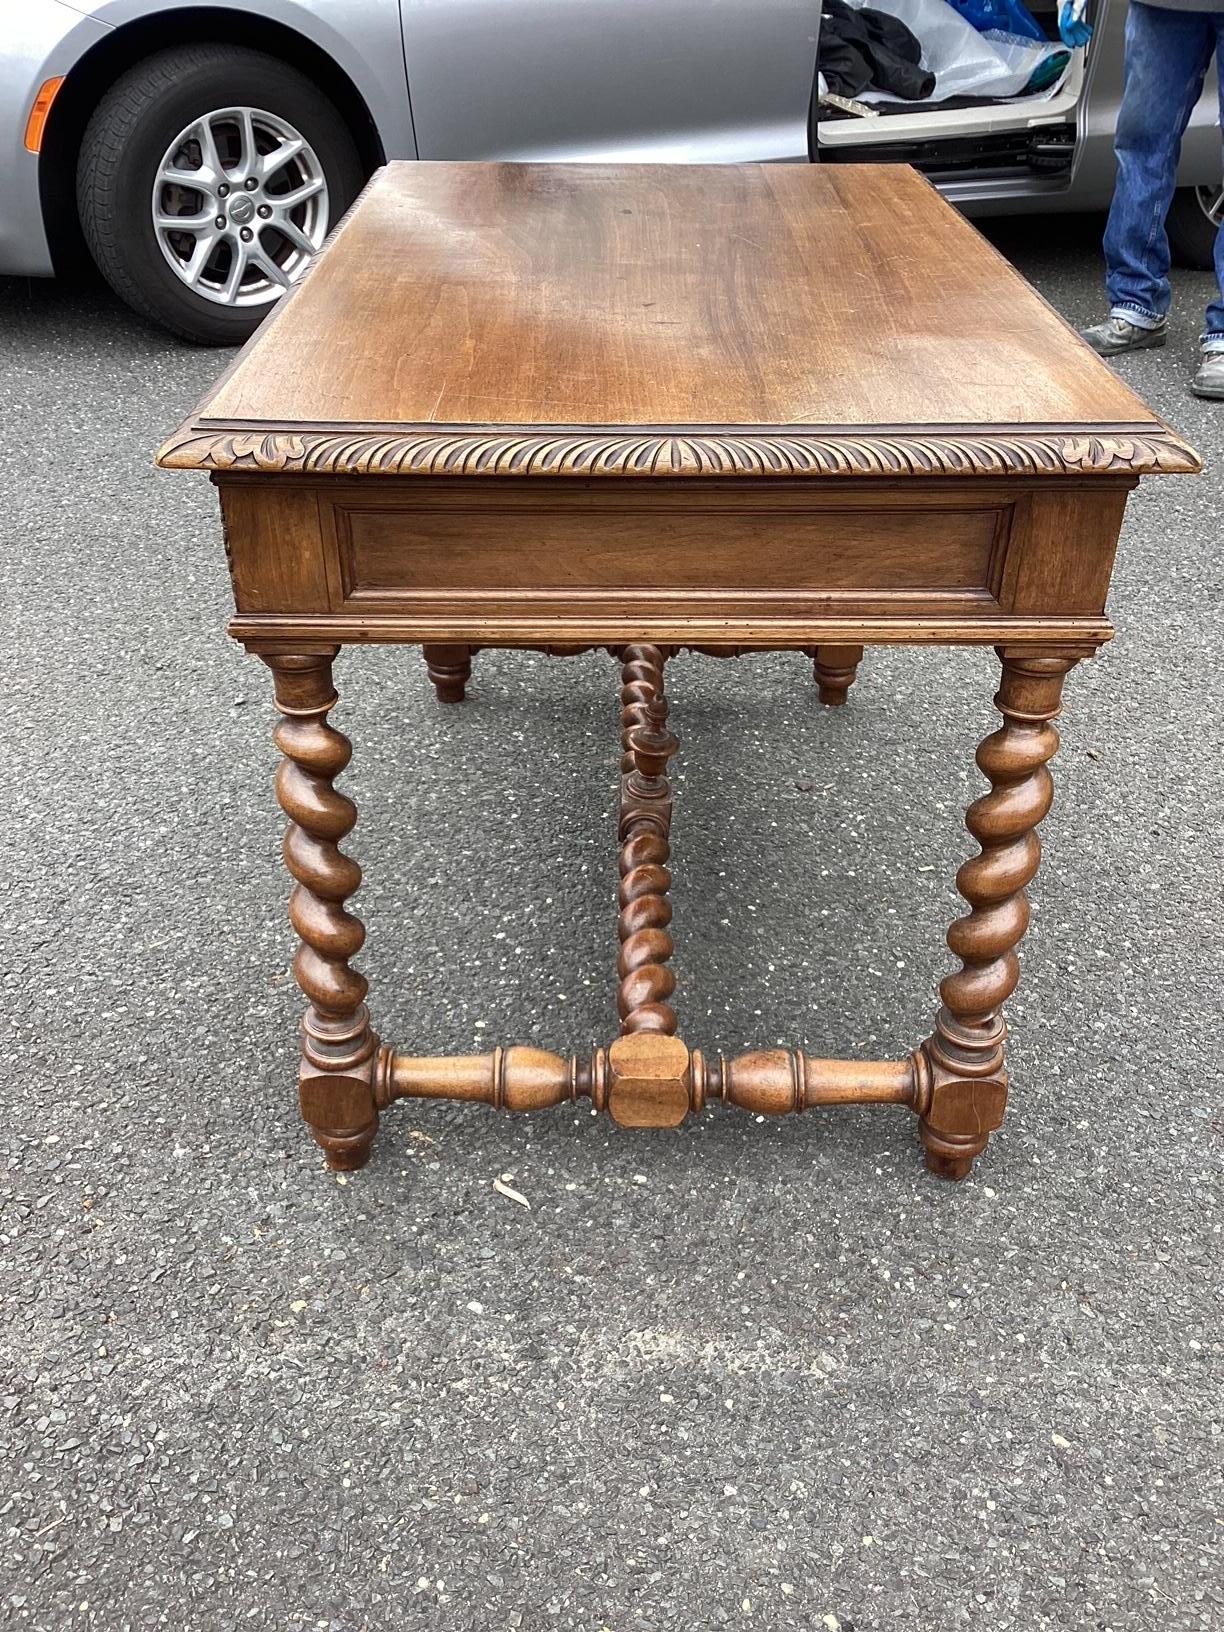 Gorgeous antique French desk with lovely patina and and solid walnut top over handsome barley twist legs. There are 2 front drawers for storage and a cross-stretcher for stability. The delicate carvings on the drawer fronts and carved accents along